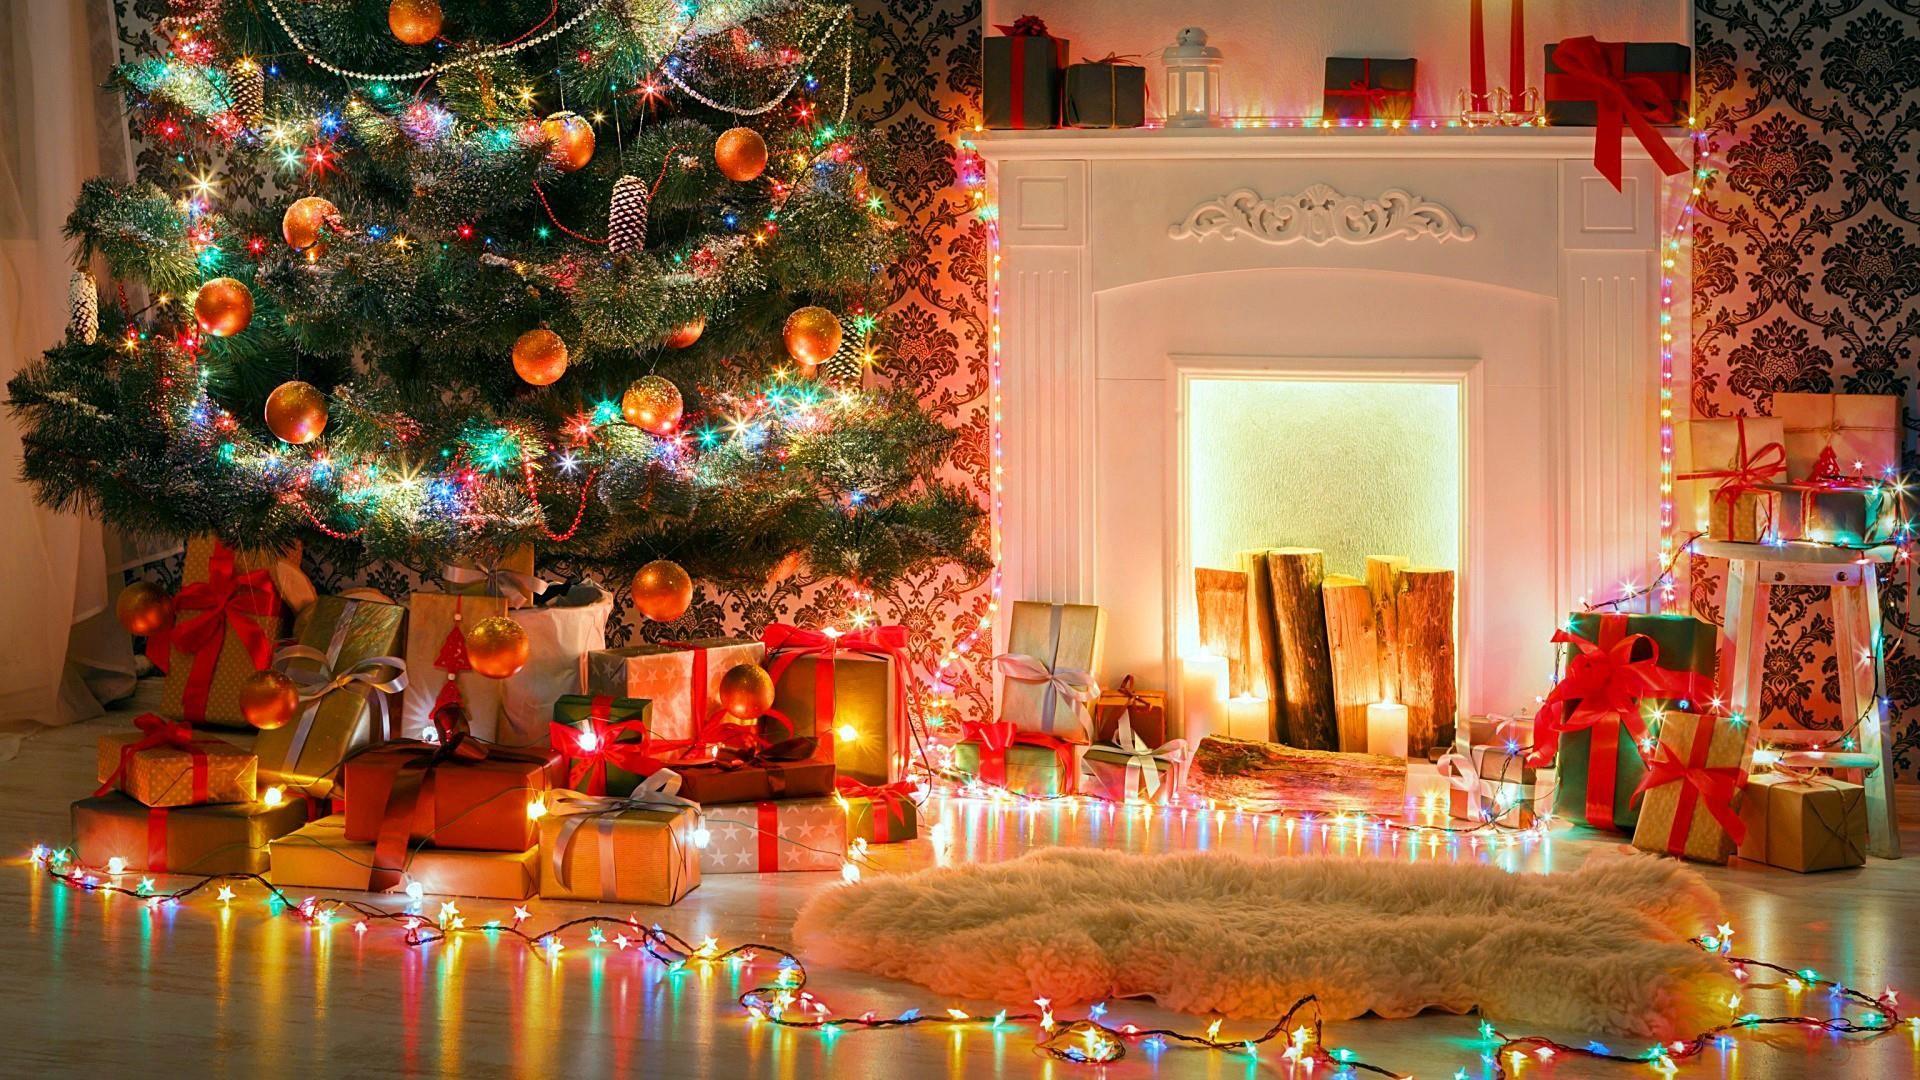 Christmas Fireplace Wallpaper background picture